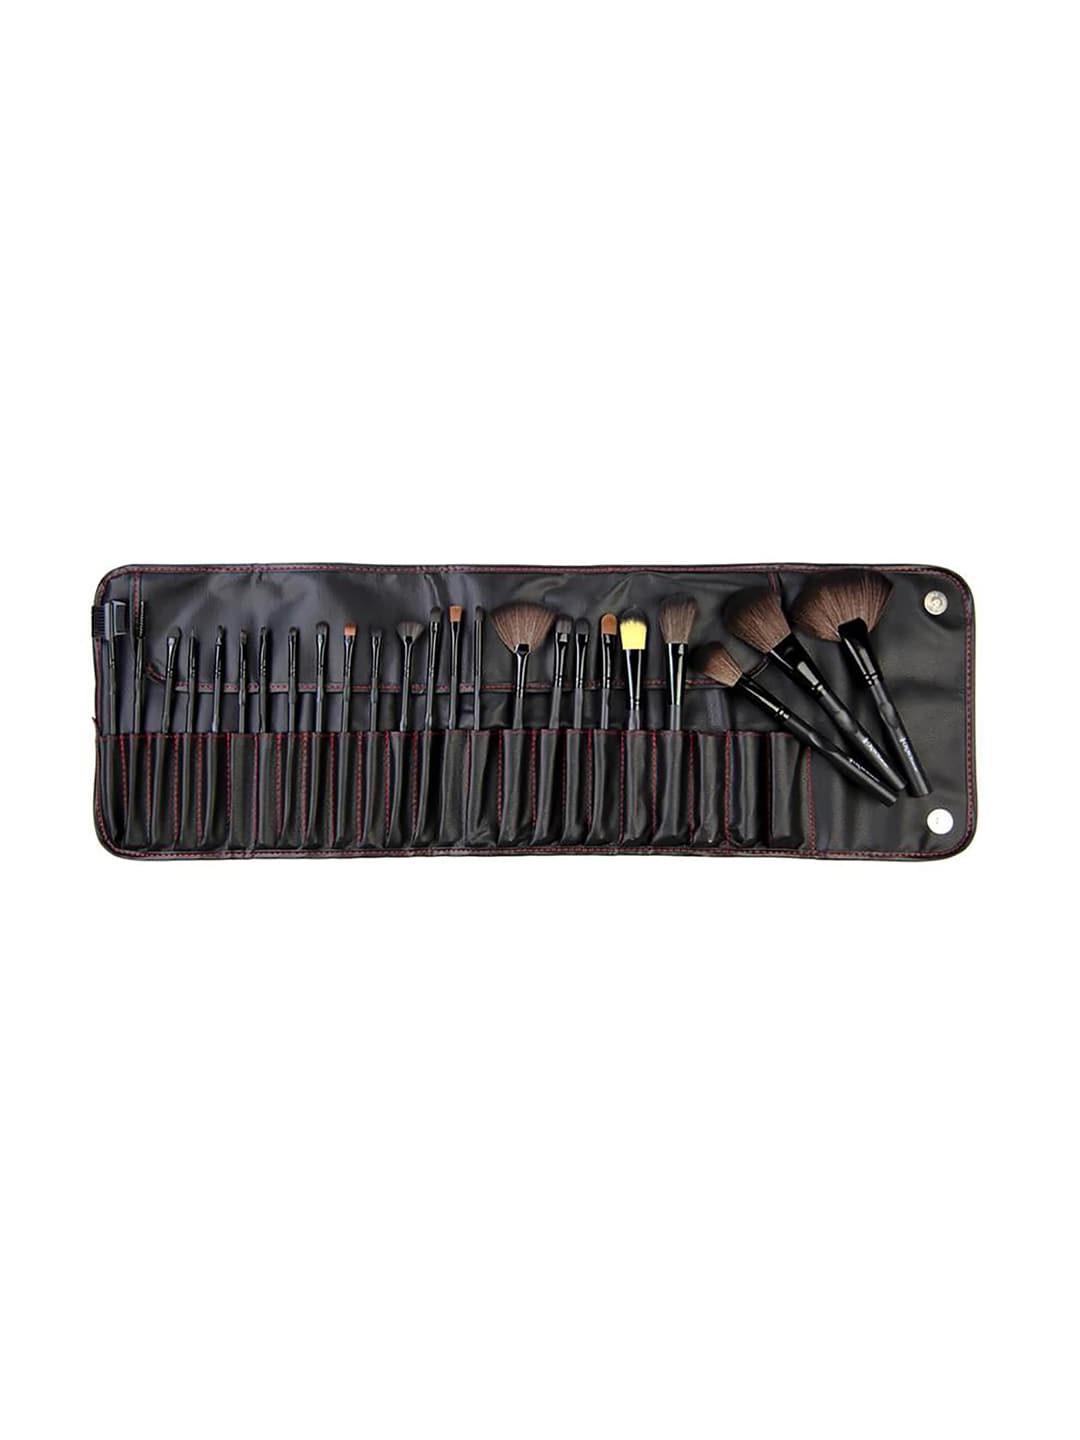 Ronzille Set Of 24 Black Soft Makeup Brush Set Price in India